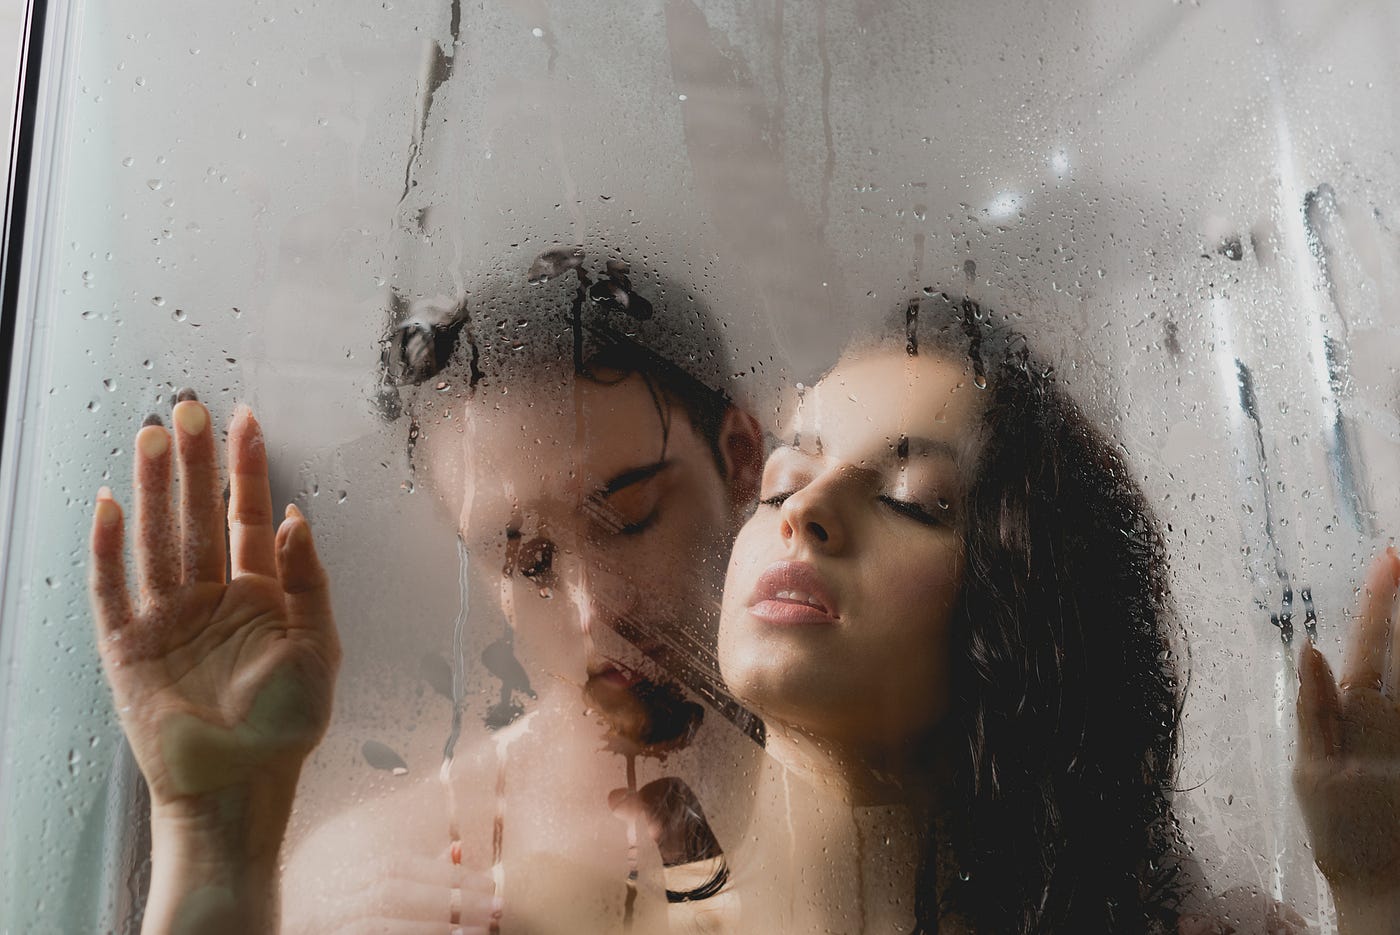 3 Reasons to Try Showering With Your Partner Enjoy this wet path to intimacy Sex…With a Side of Quirk photo